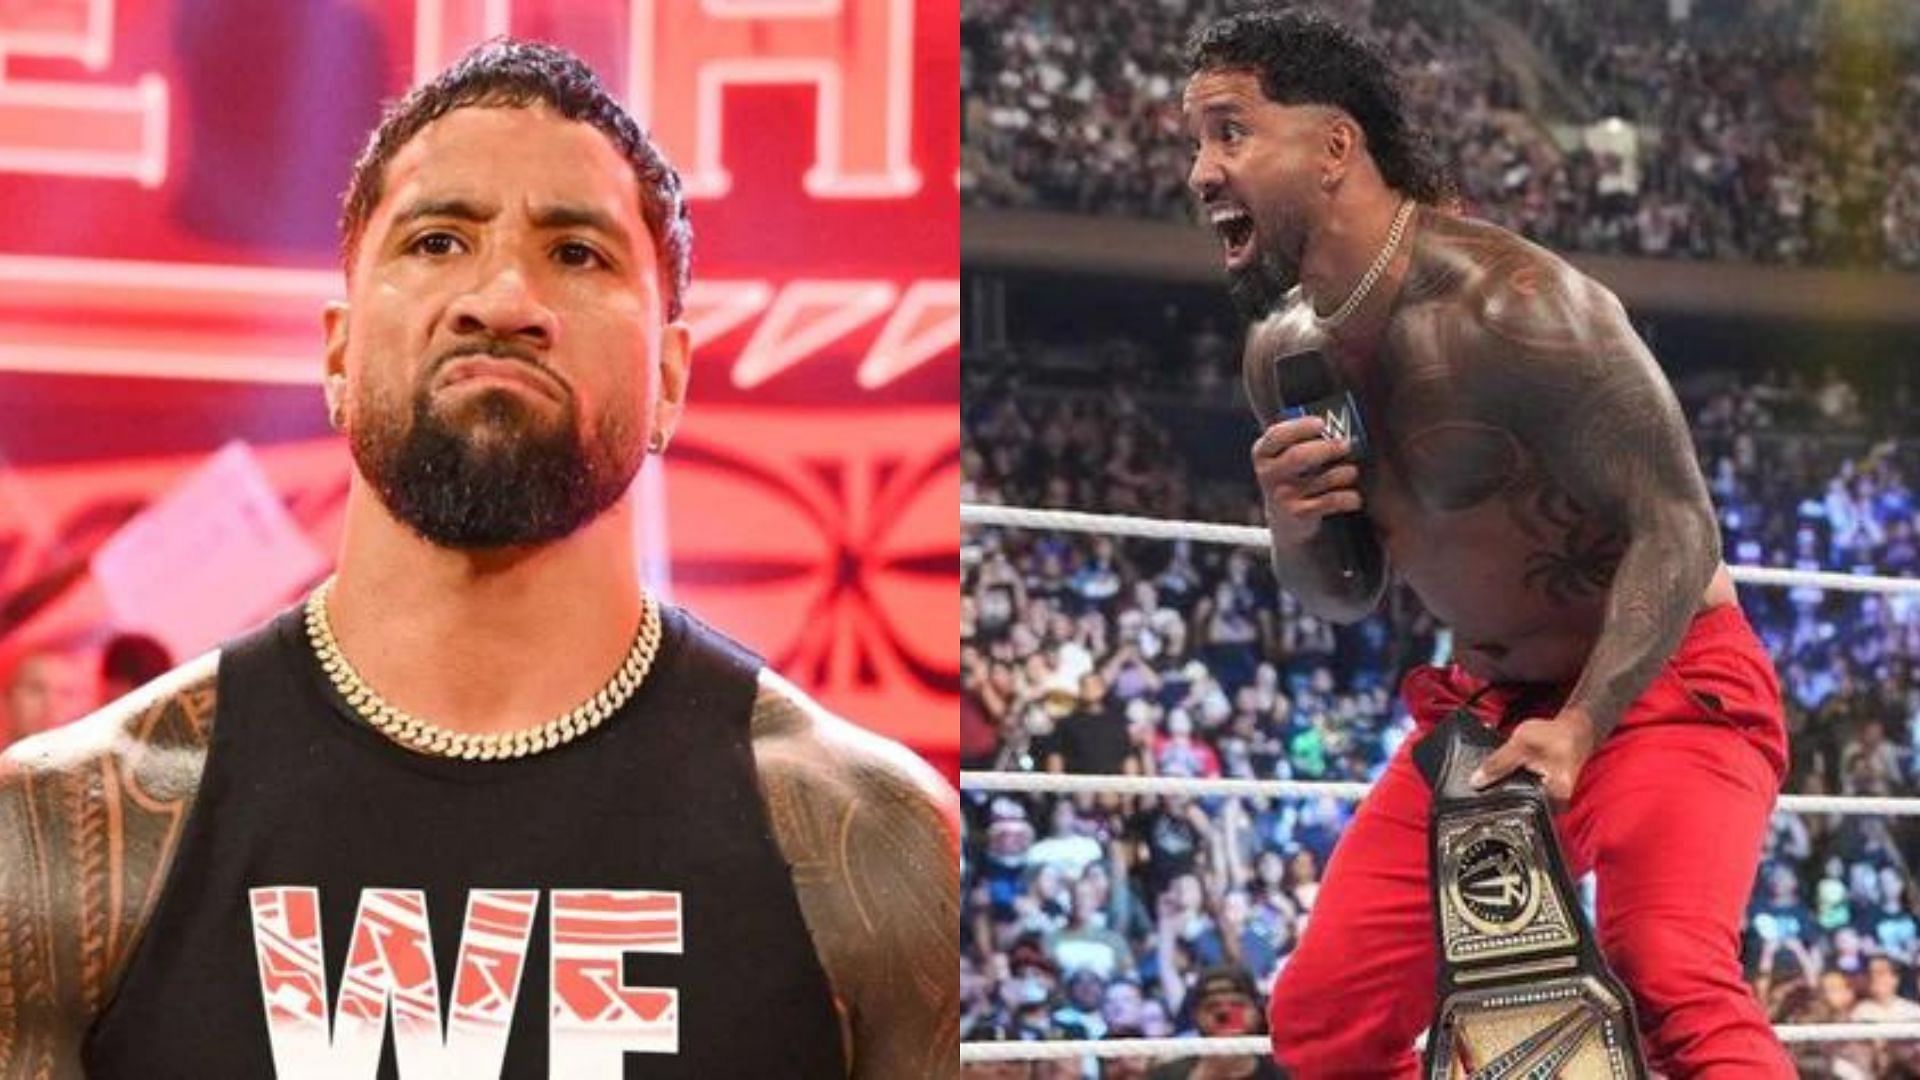 Jey Uso will challenge Roman Reigns in a Tribal Combat at SummerSlam